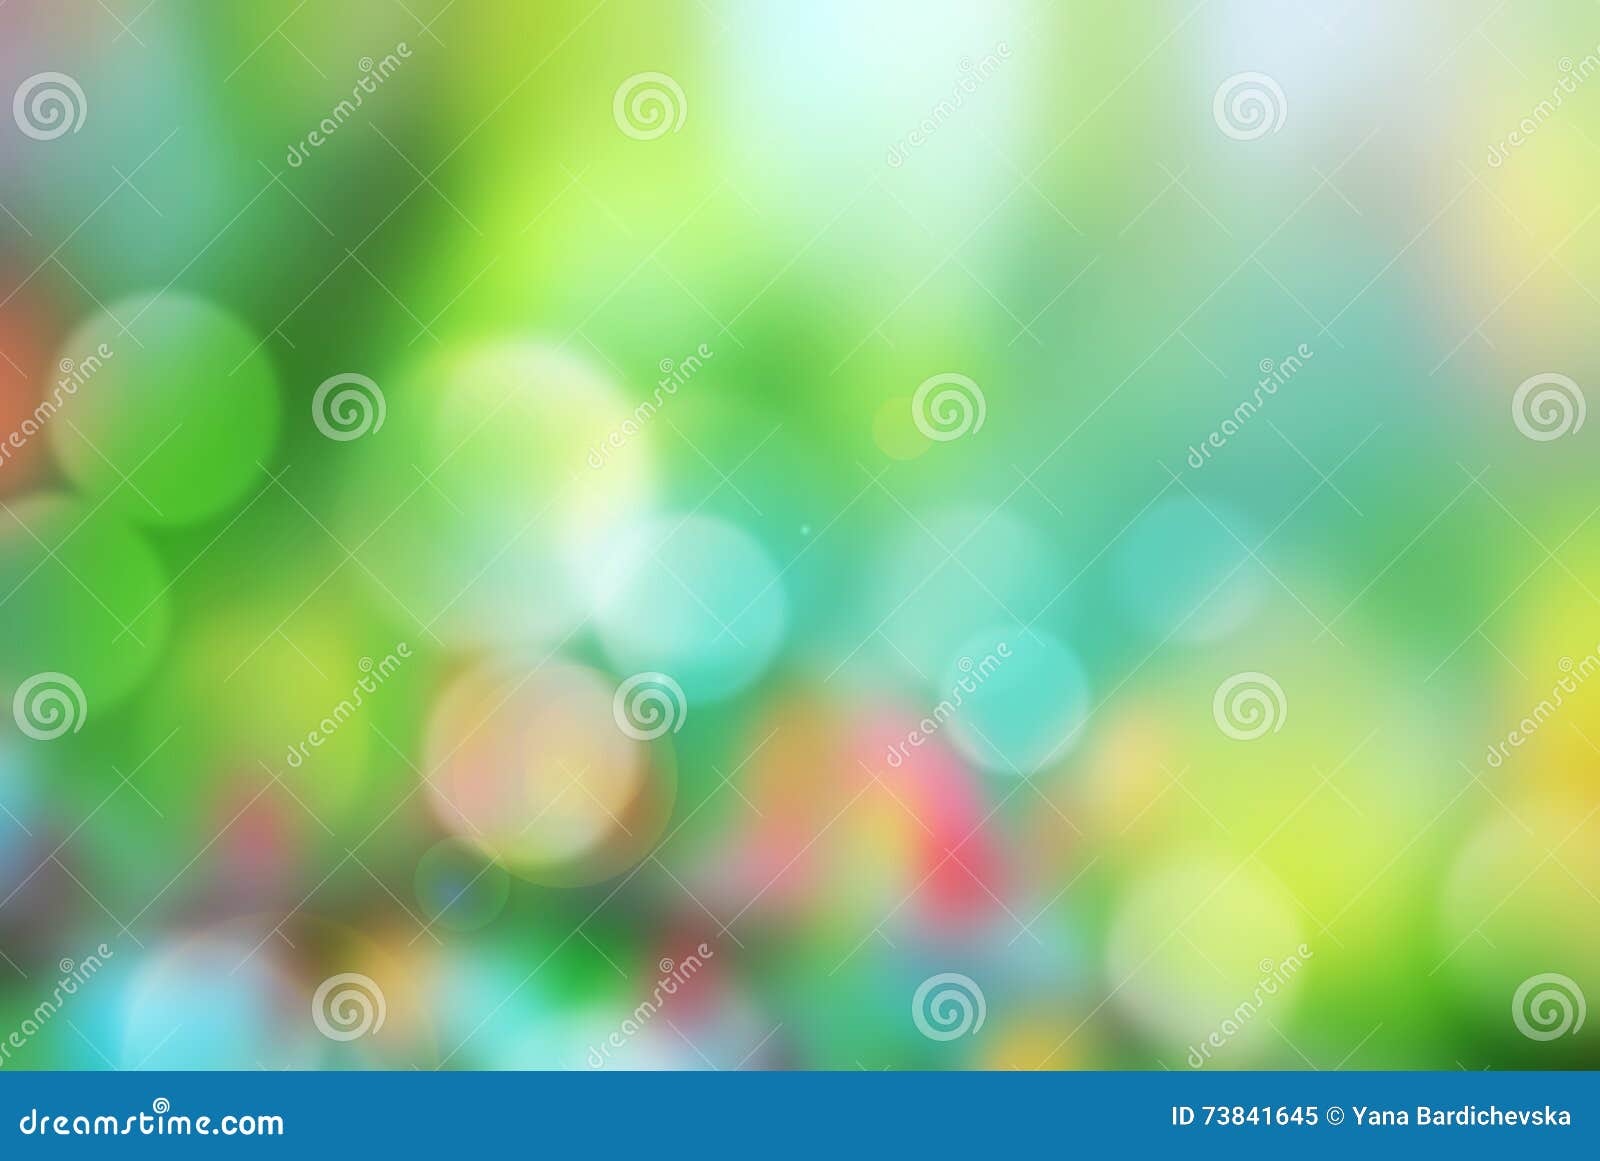 Green Natural Abstract Blur Background Illustration 73841645